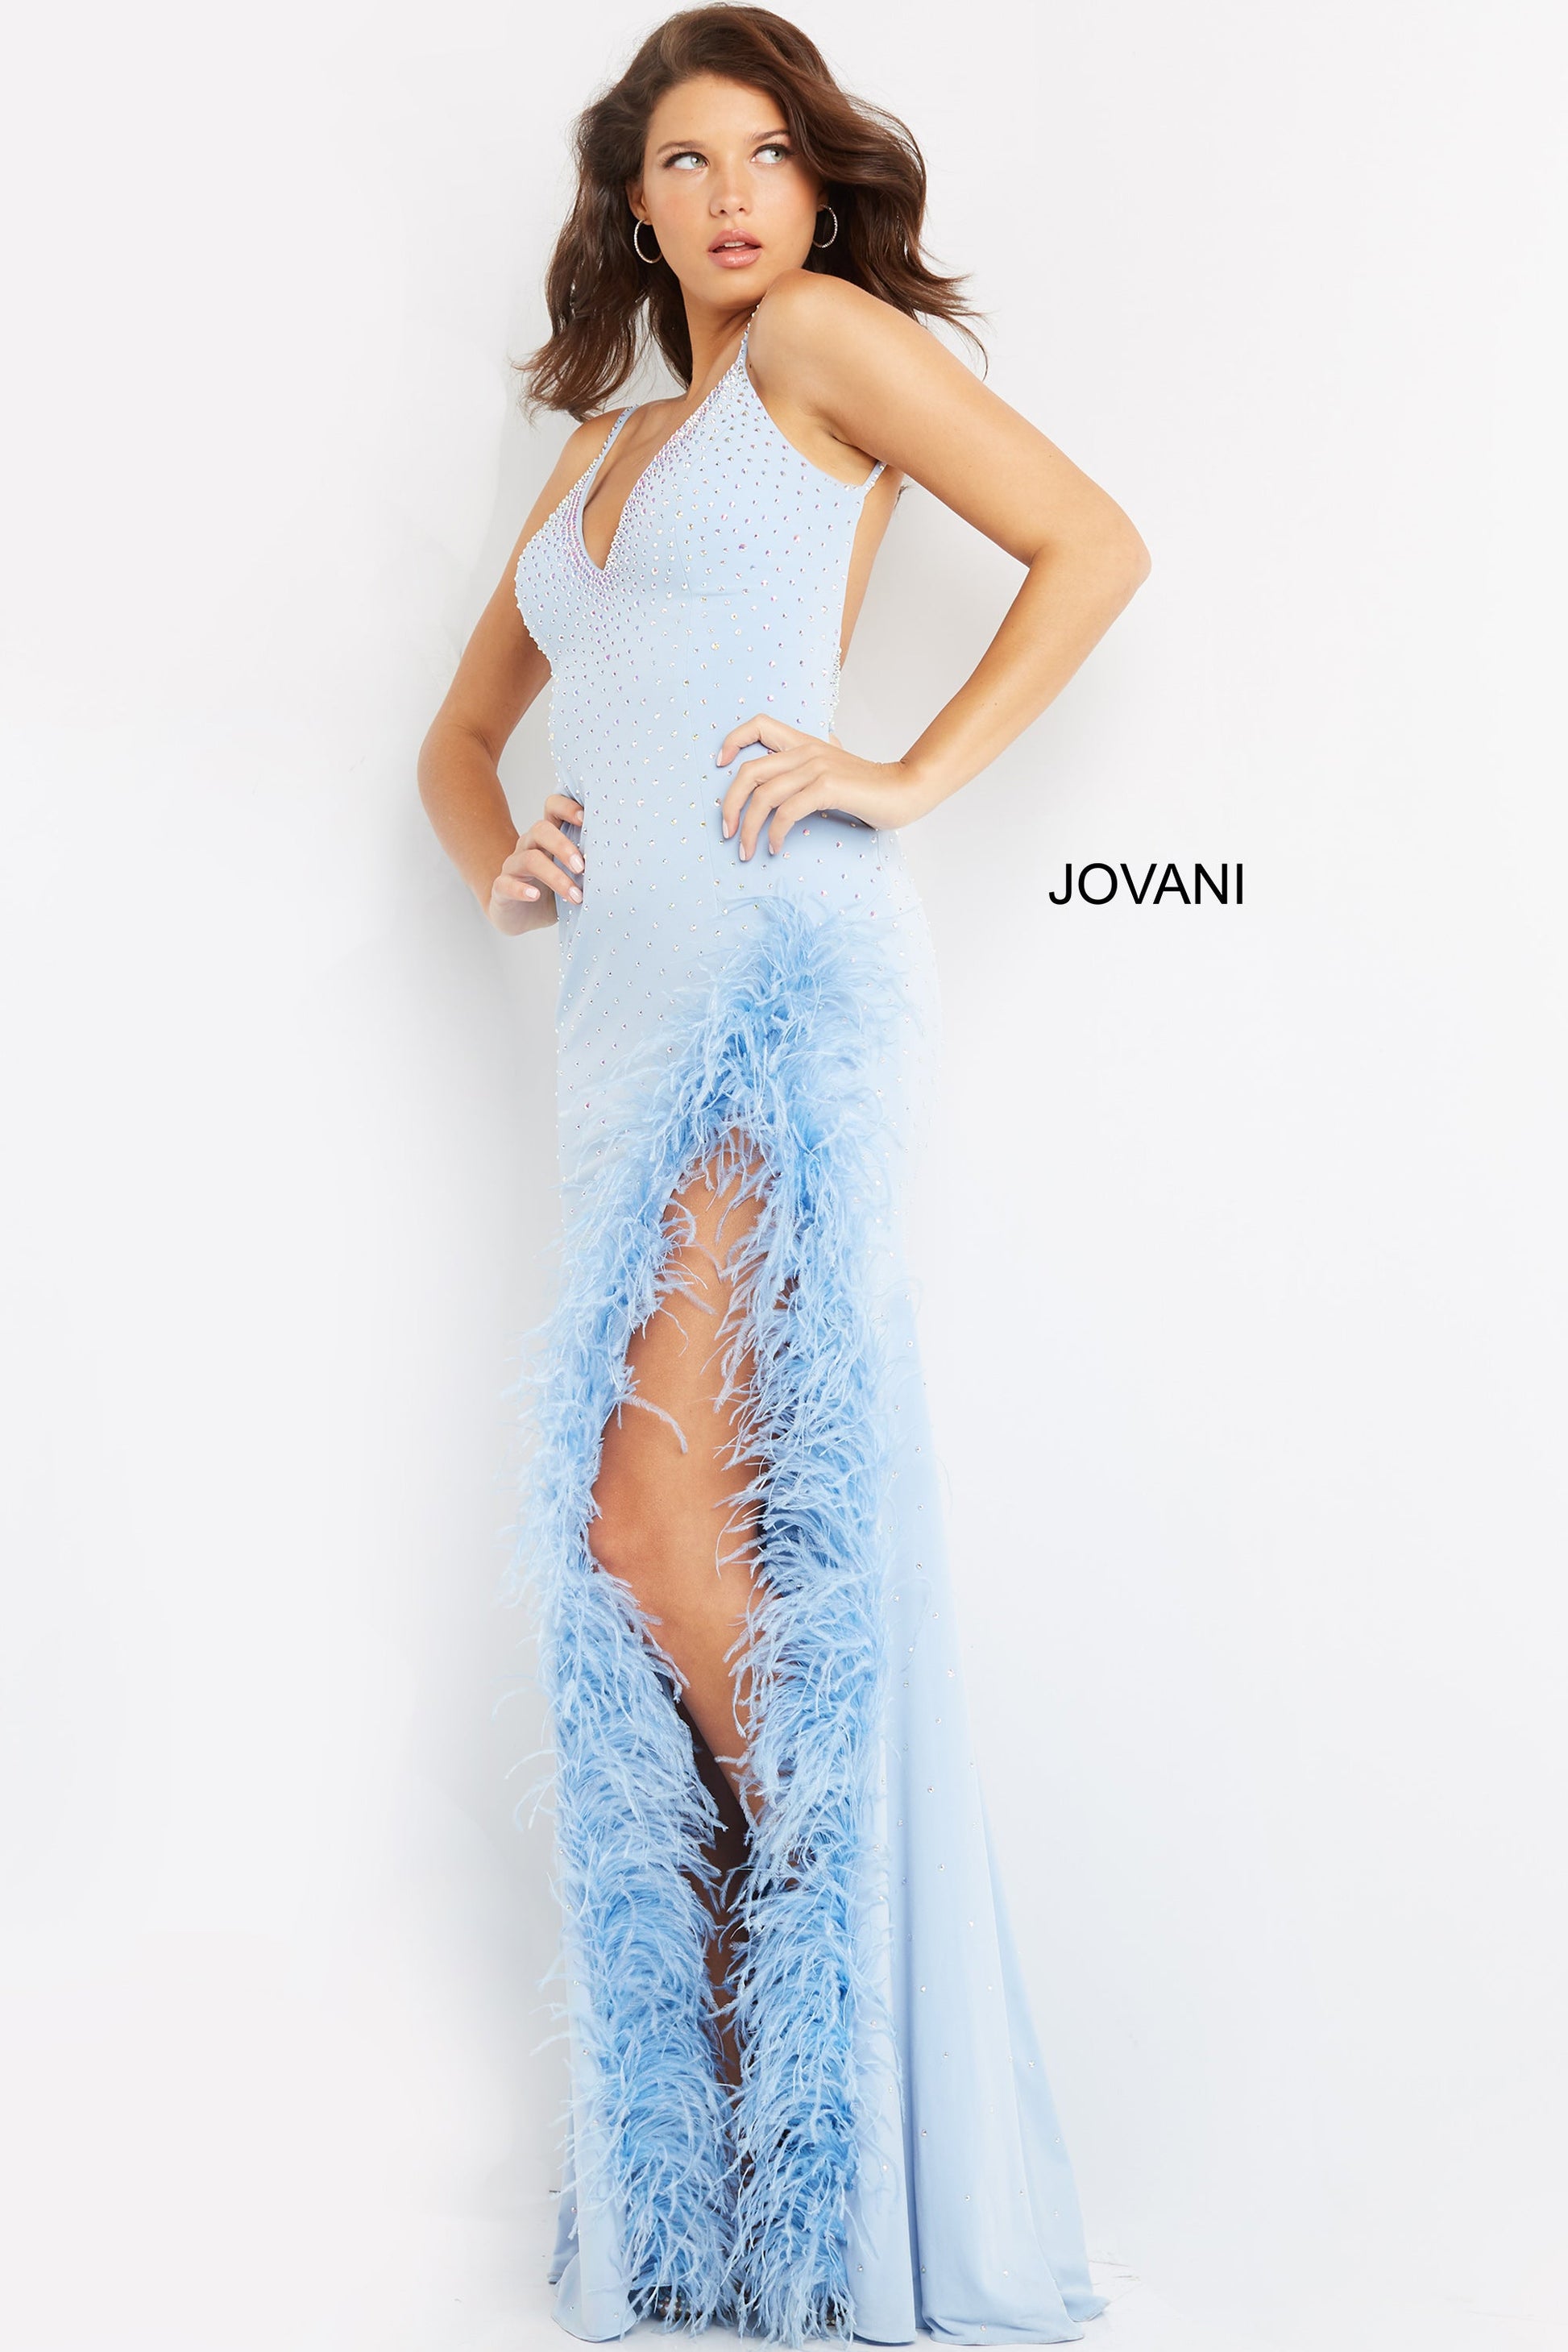 Jovani 08283  Light Blue Prom, Pageant and Formal Evening Wear Dress.  This extravagant evening gown has a v neckline and low back.  It is fitted and beaded with a feather trimmed slit. Make a statement in this stand out prom dress.